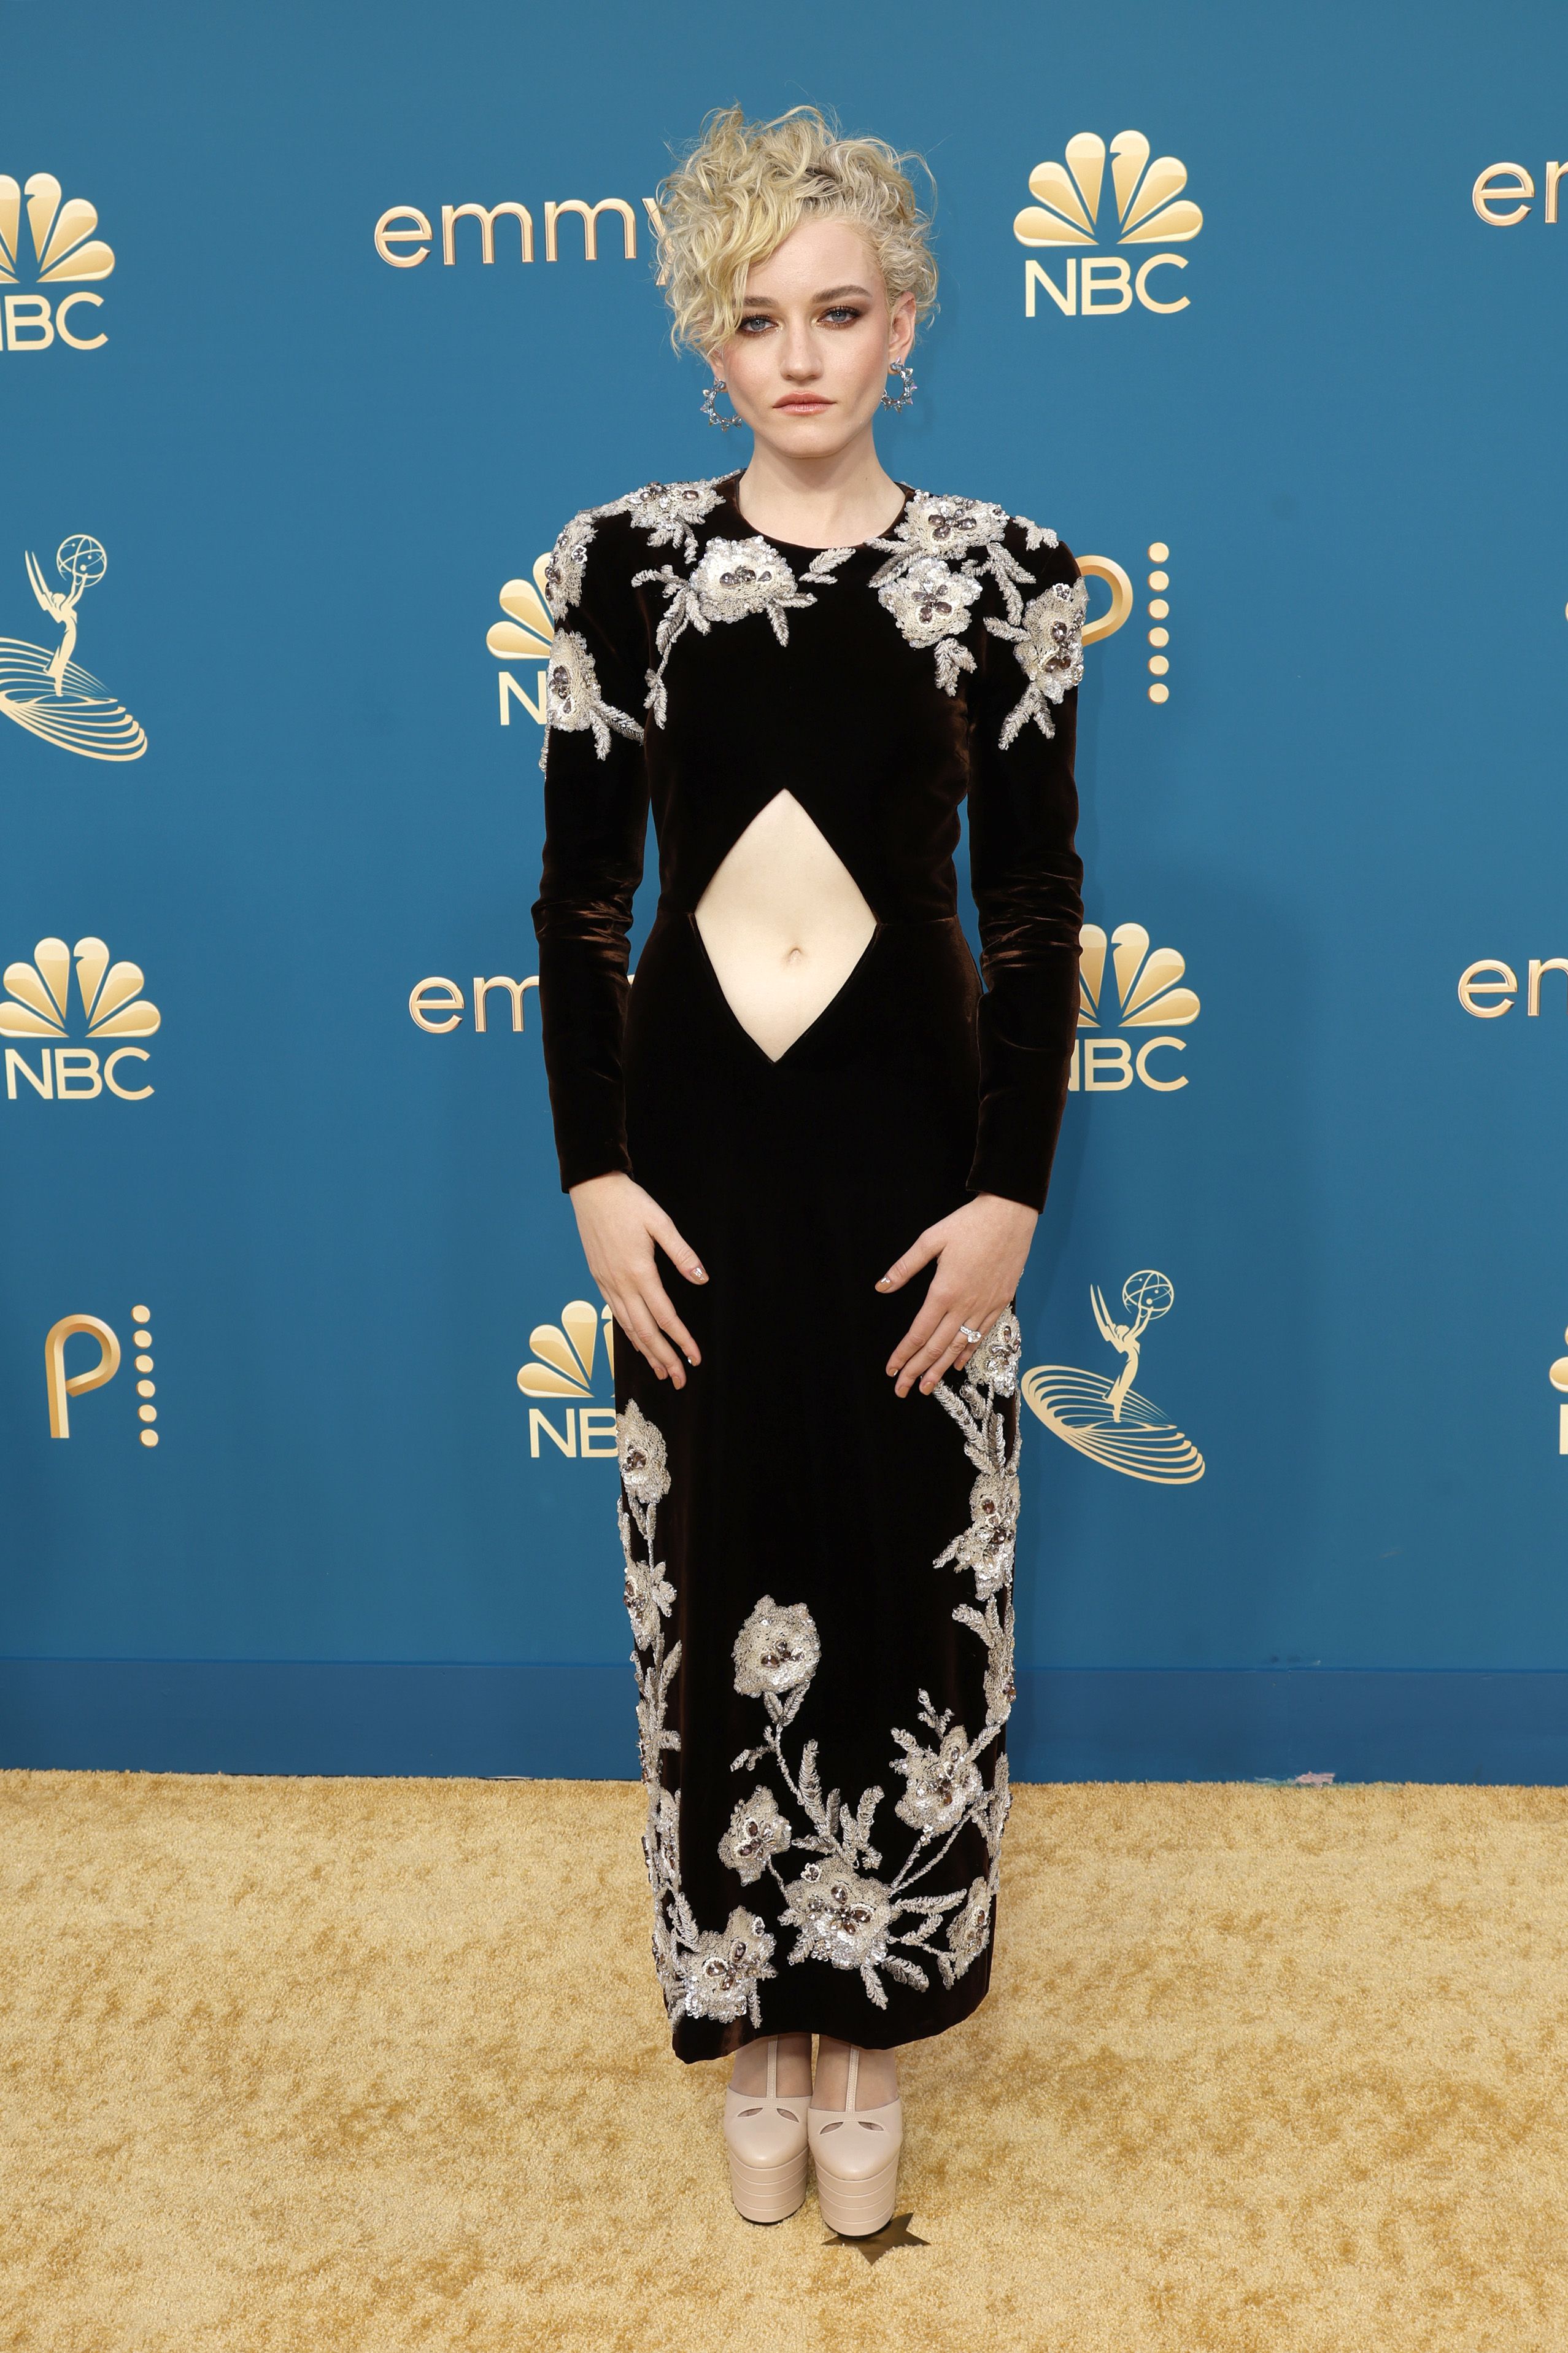 Best Dressed Celebrities at the Emmy Awards 2022